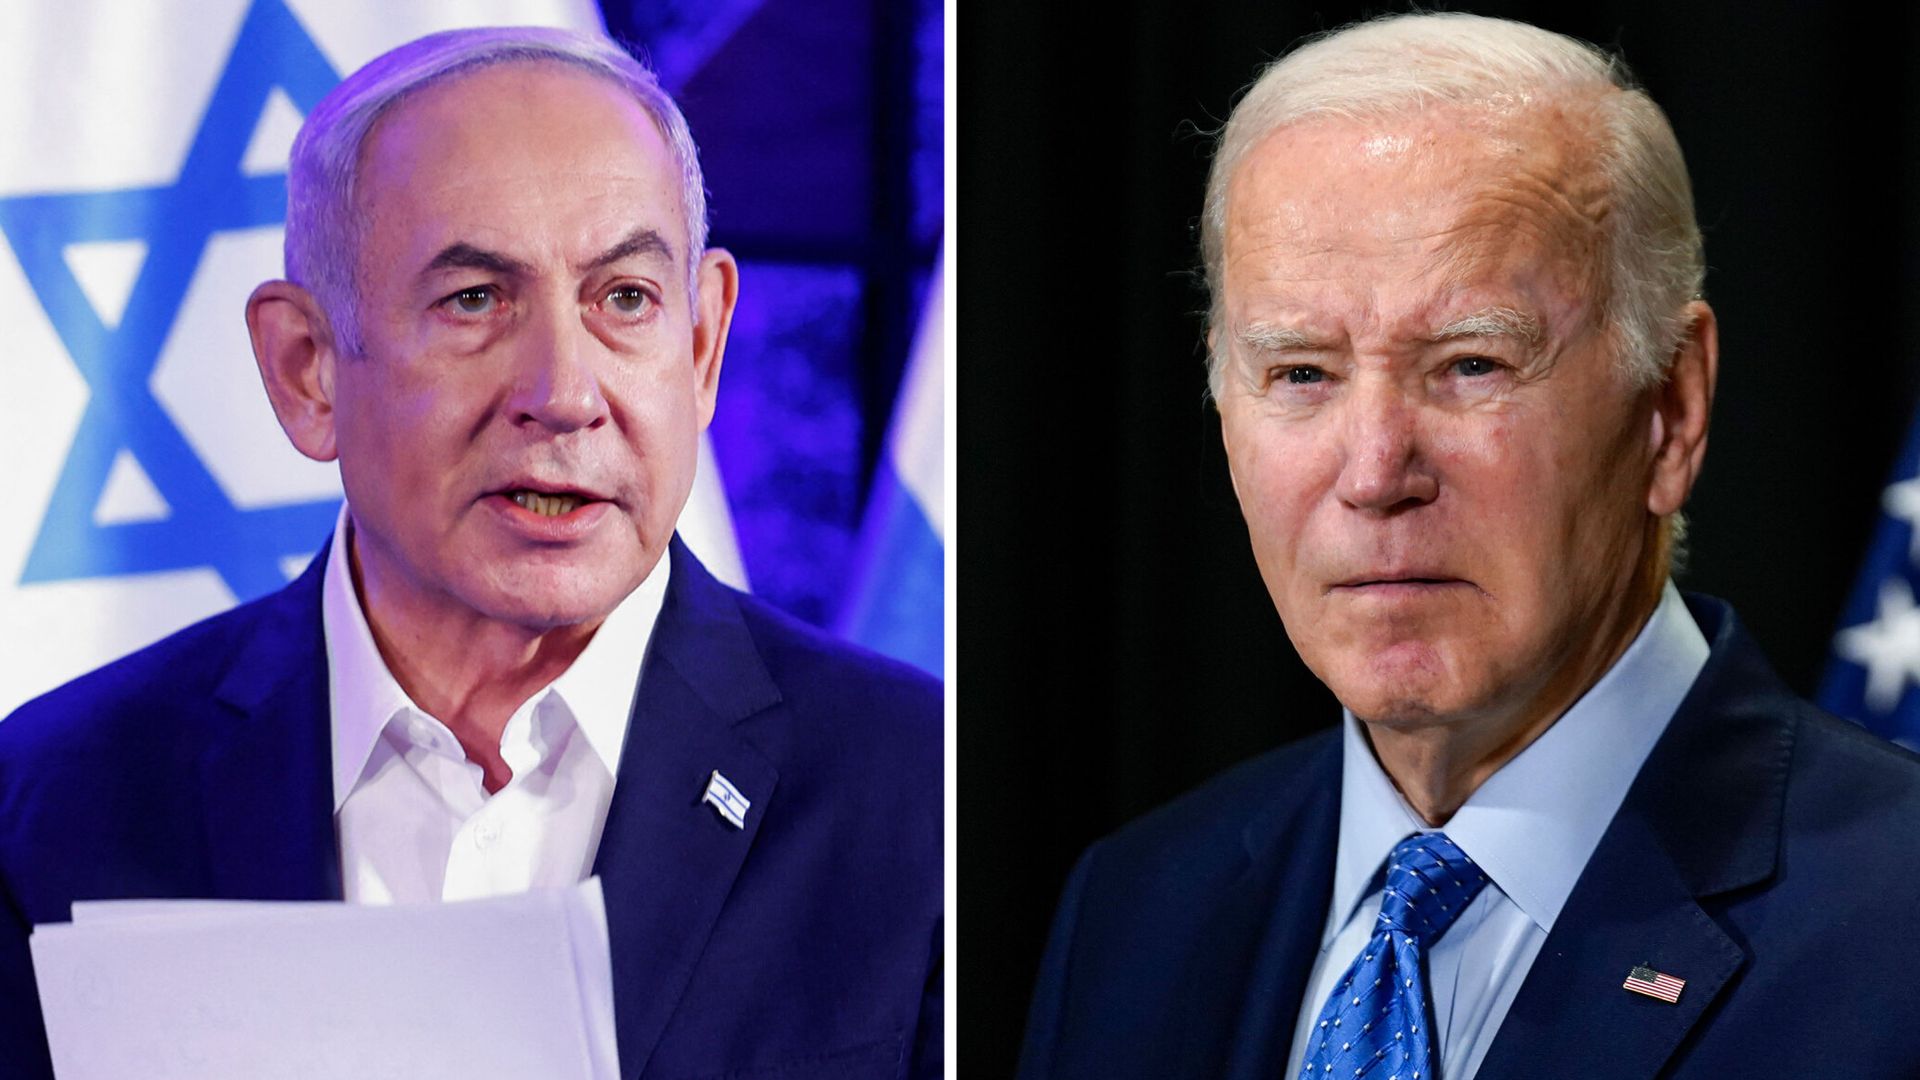 Biden says US will stop some weapons shipments to Israel if it invades Rafah